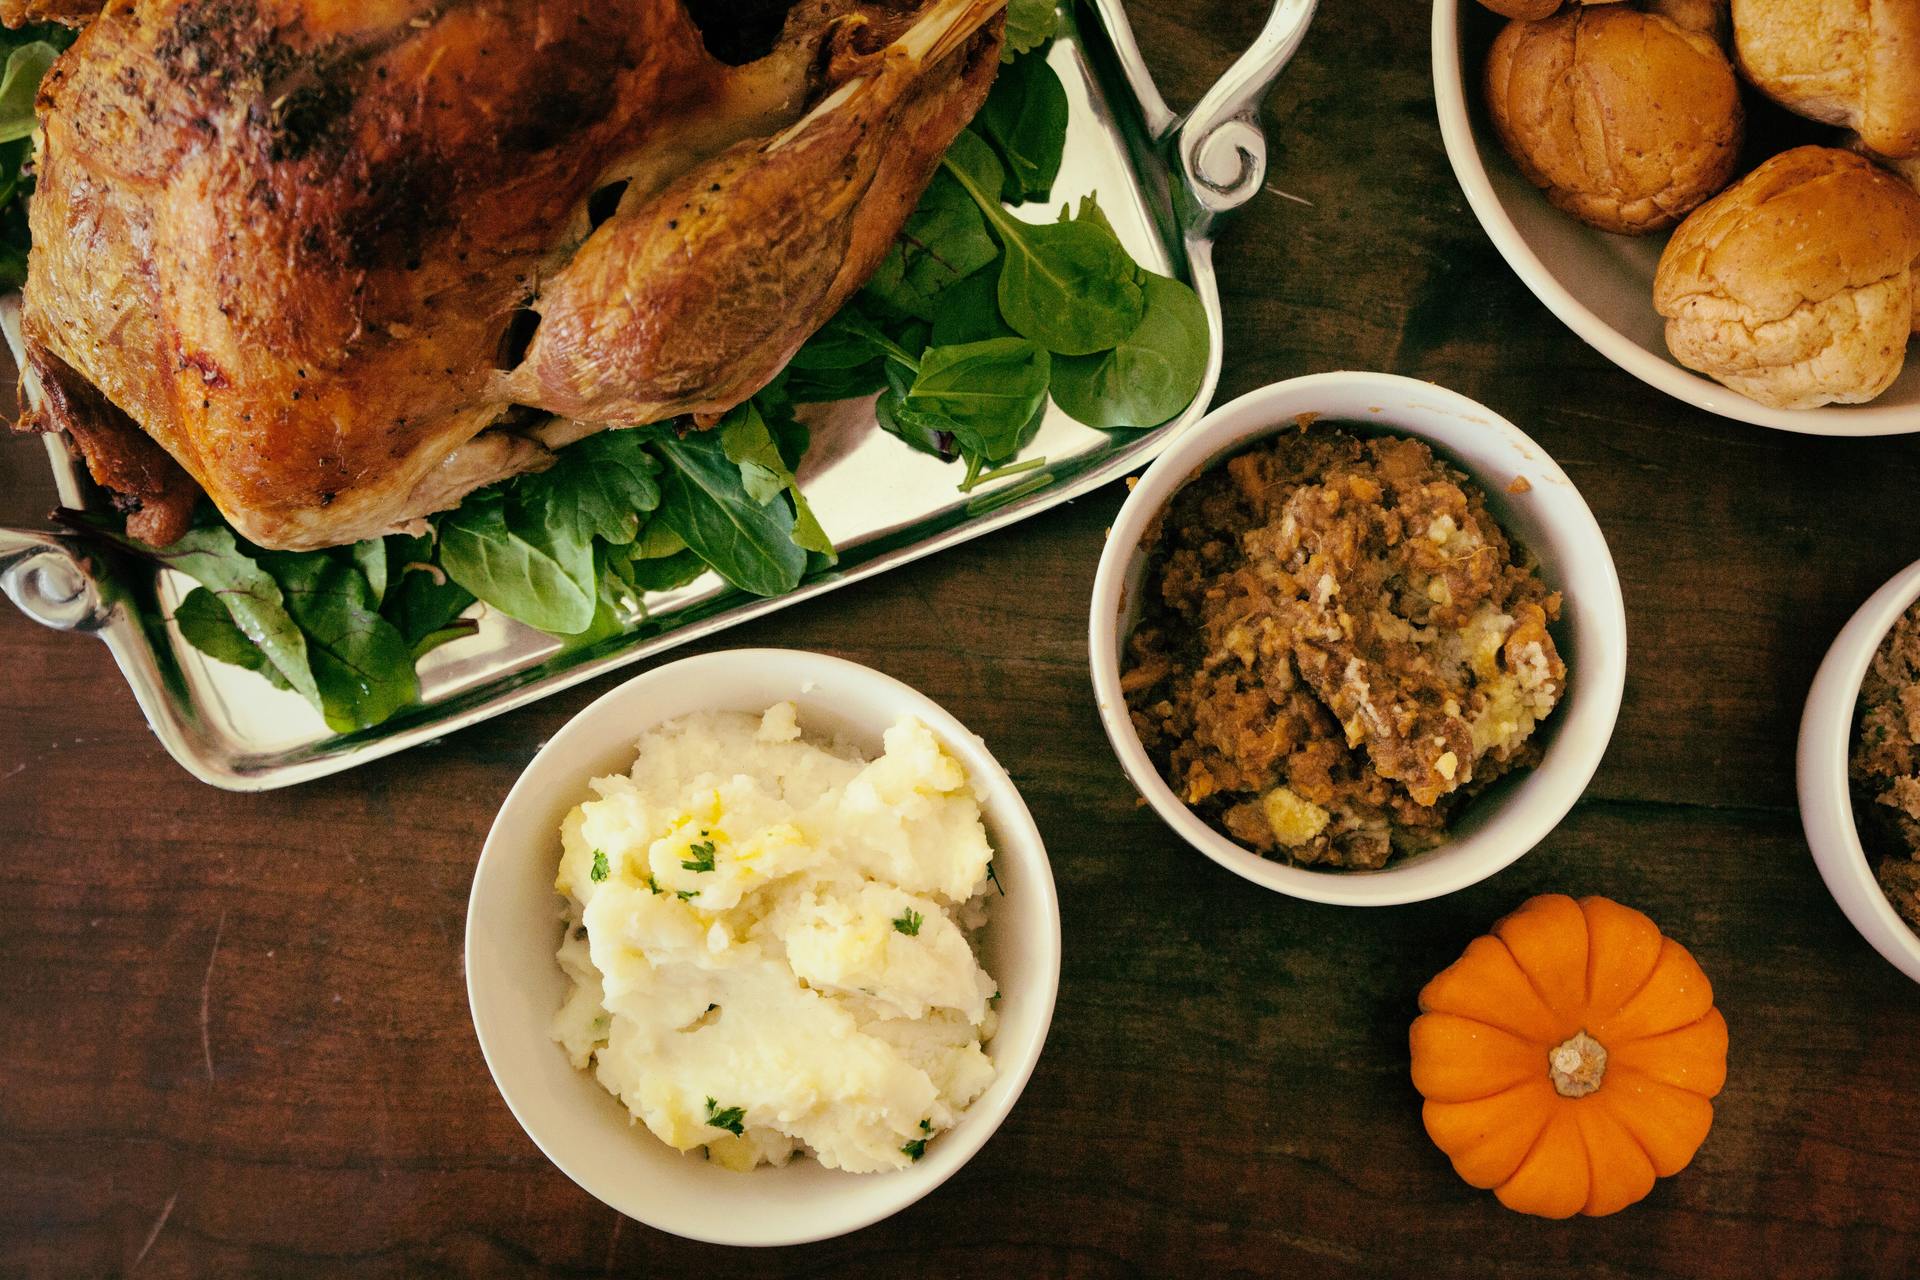 Feast or Famine? How to make it through the holidays without gaining weight or feeling deprived